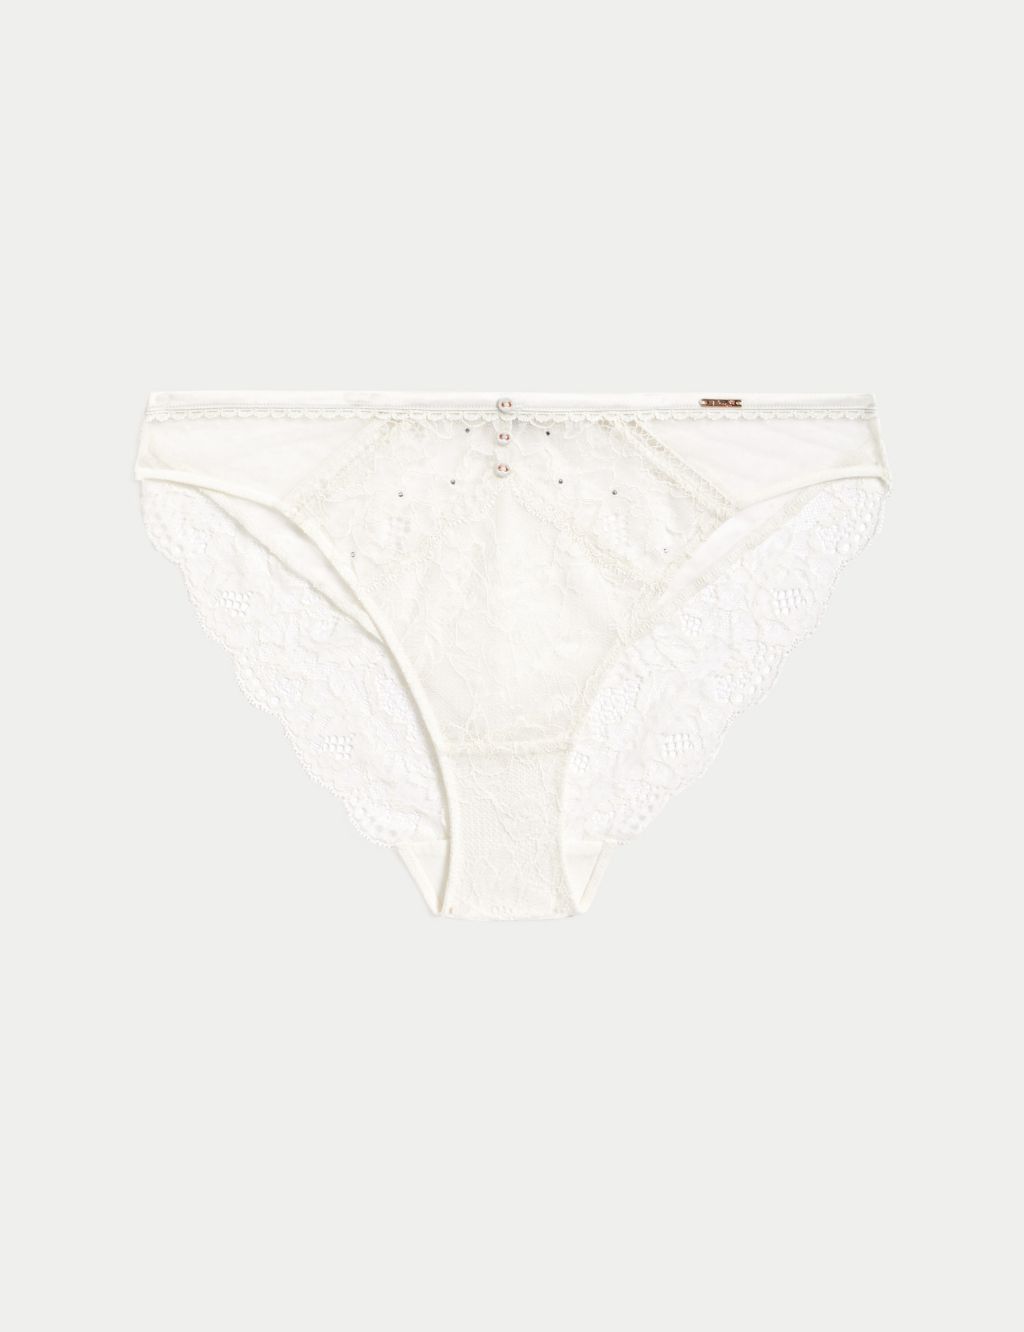 Aster Sparkle Lace High Leg Knickers image 2